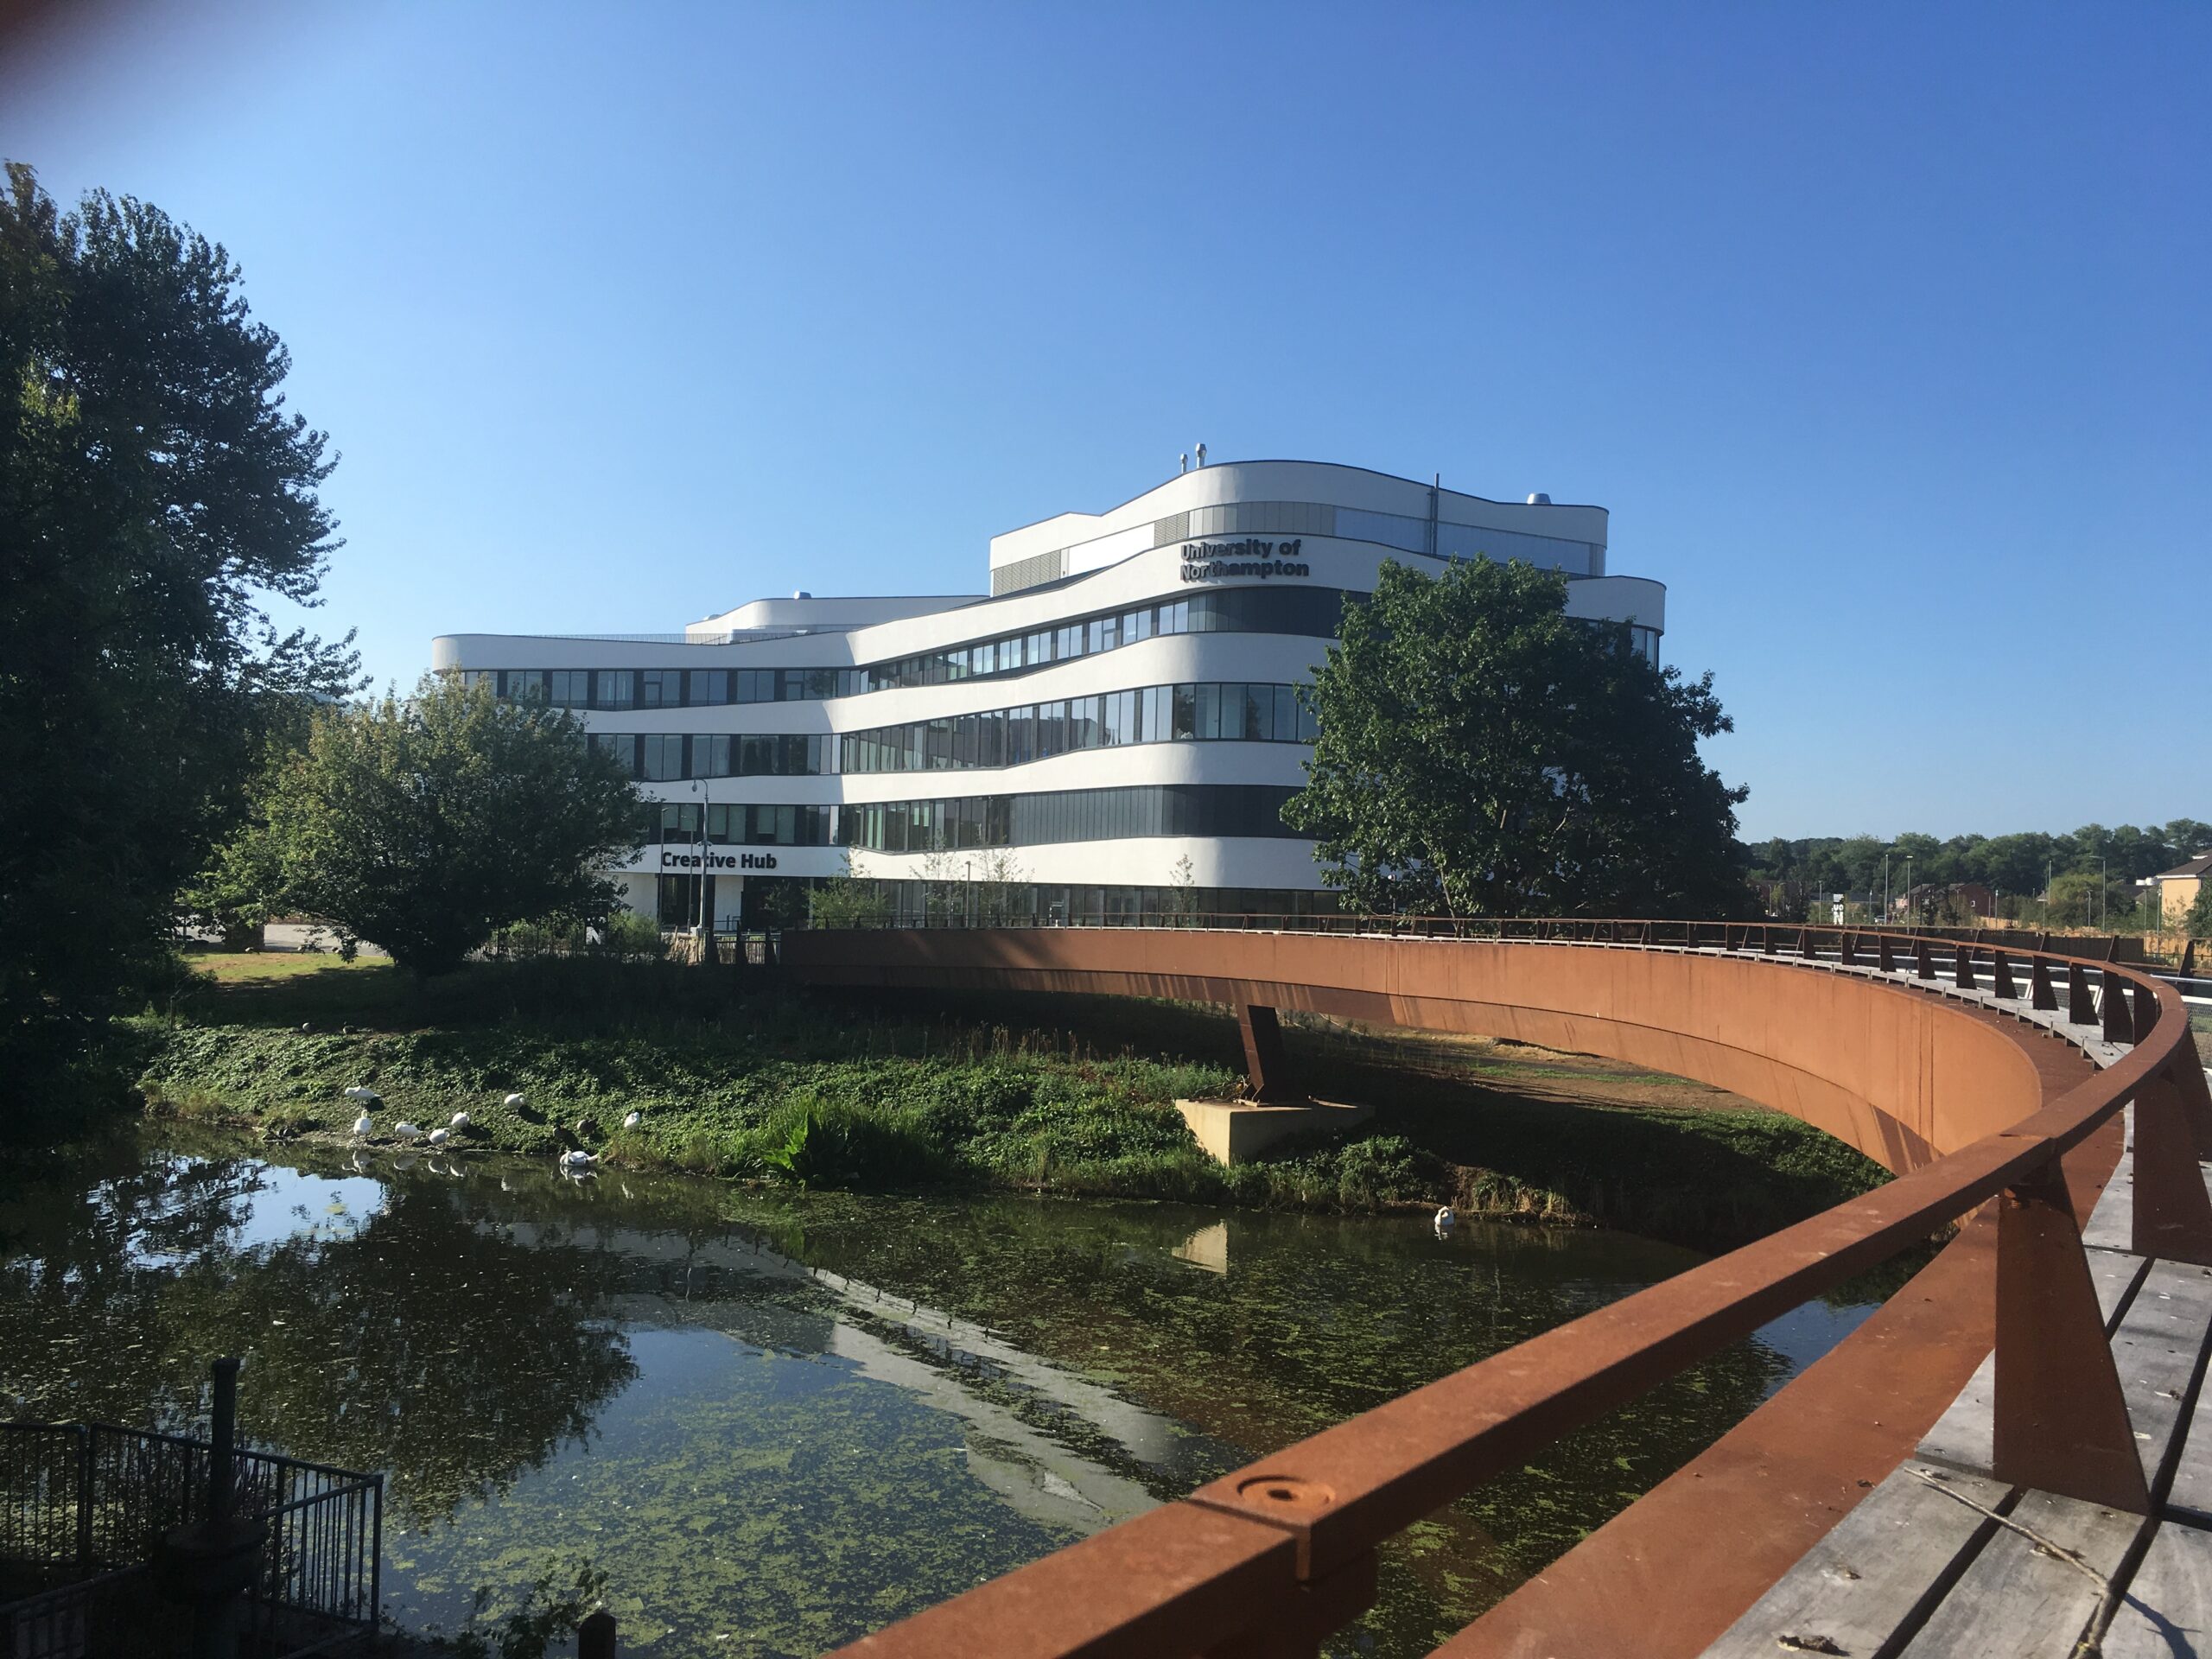 The University of Northampton's Creative Hub with the bridge over the river leading to it